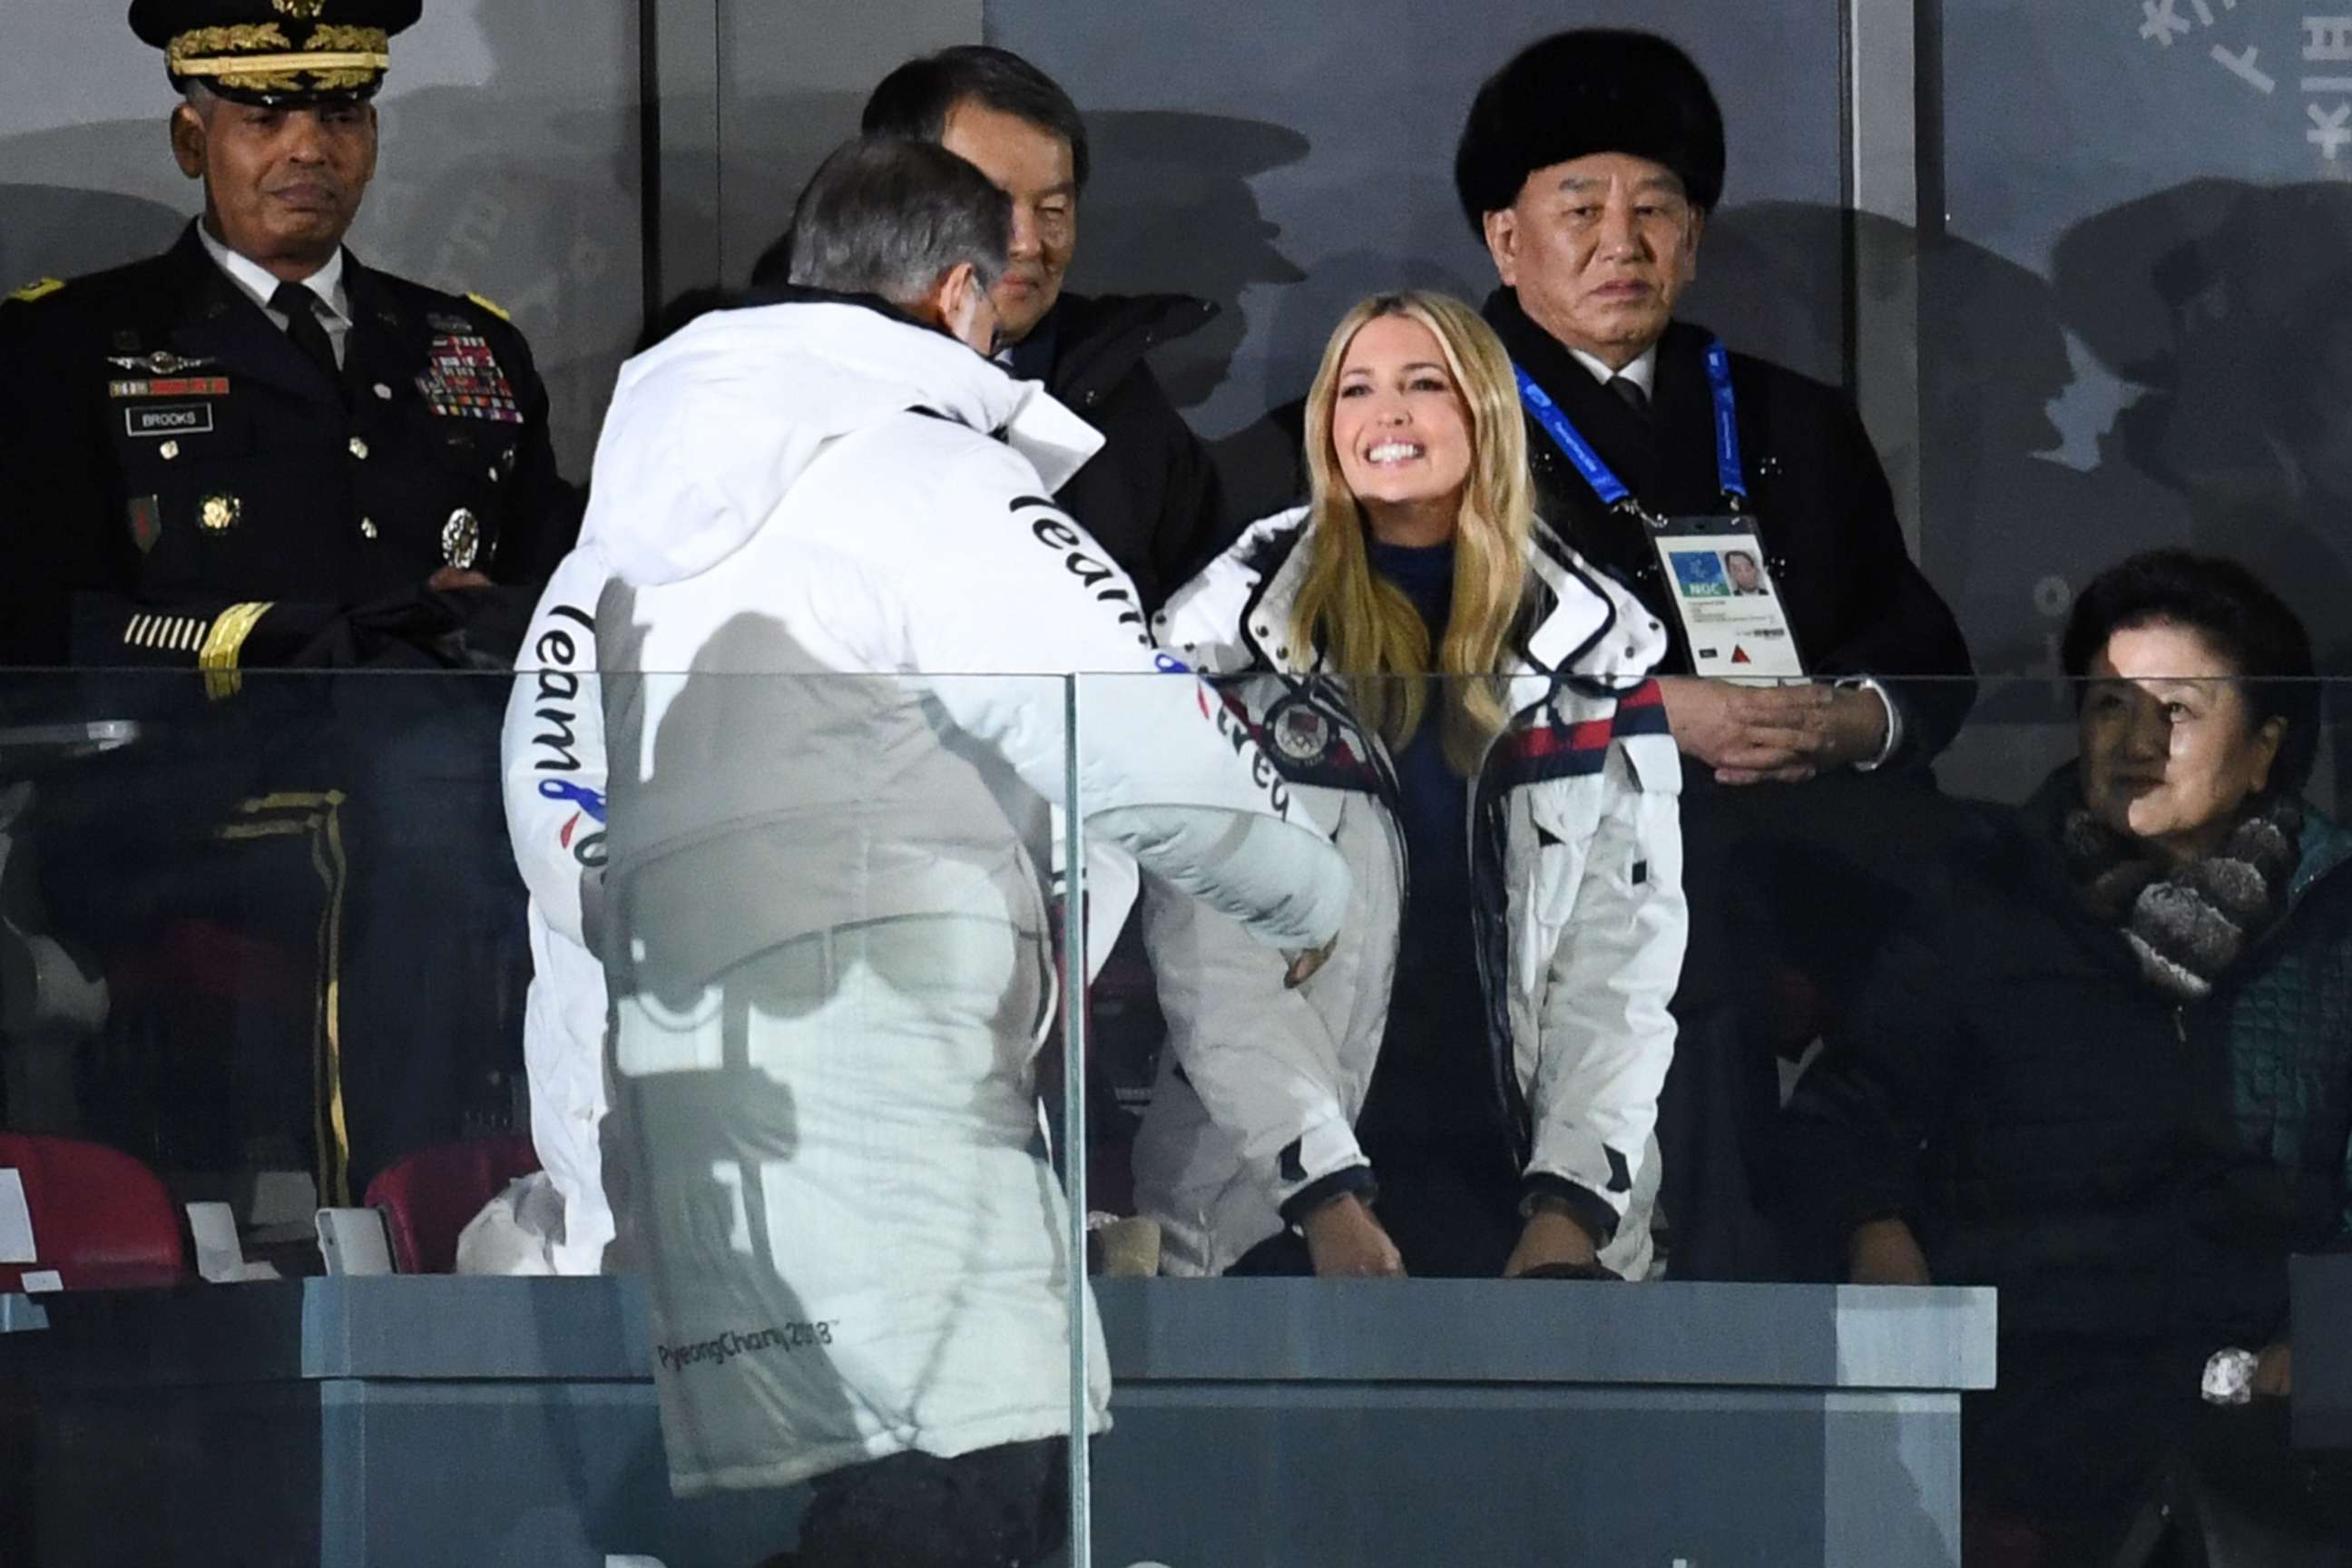 PHOTO: South Korea's President Moon Jae-in greets Ivanka Trump as North Korean General Kim Yong Chol, rear right, looks on during the closing ceremony of the Pyeongchang 2018 Winter Olympic Games, Feb. 25, 2018.